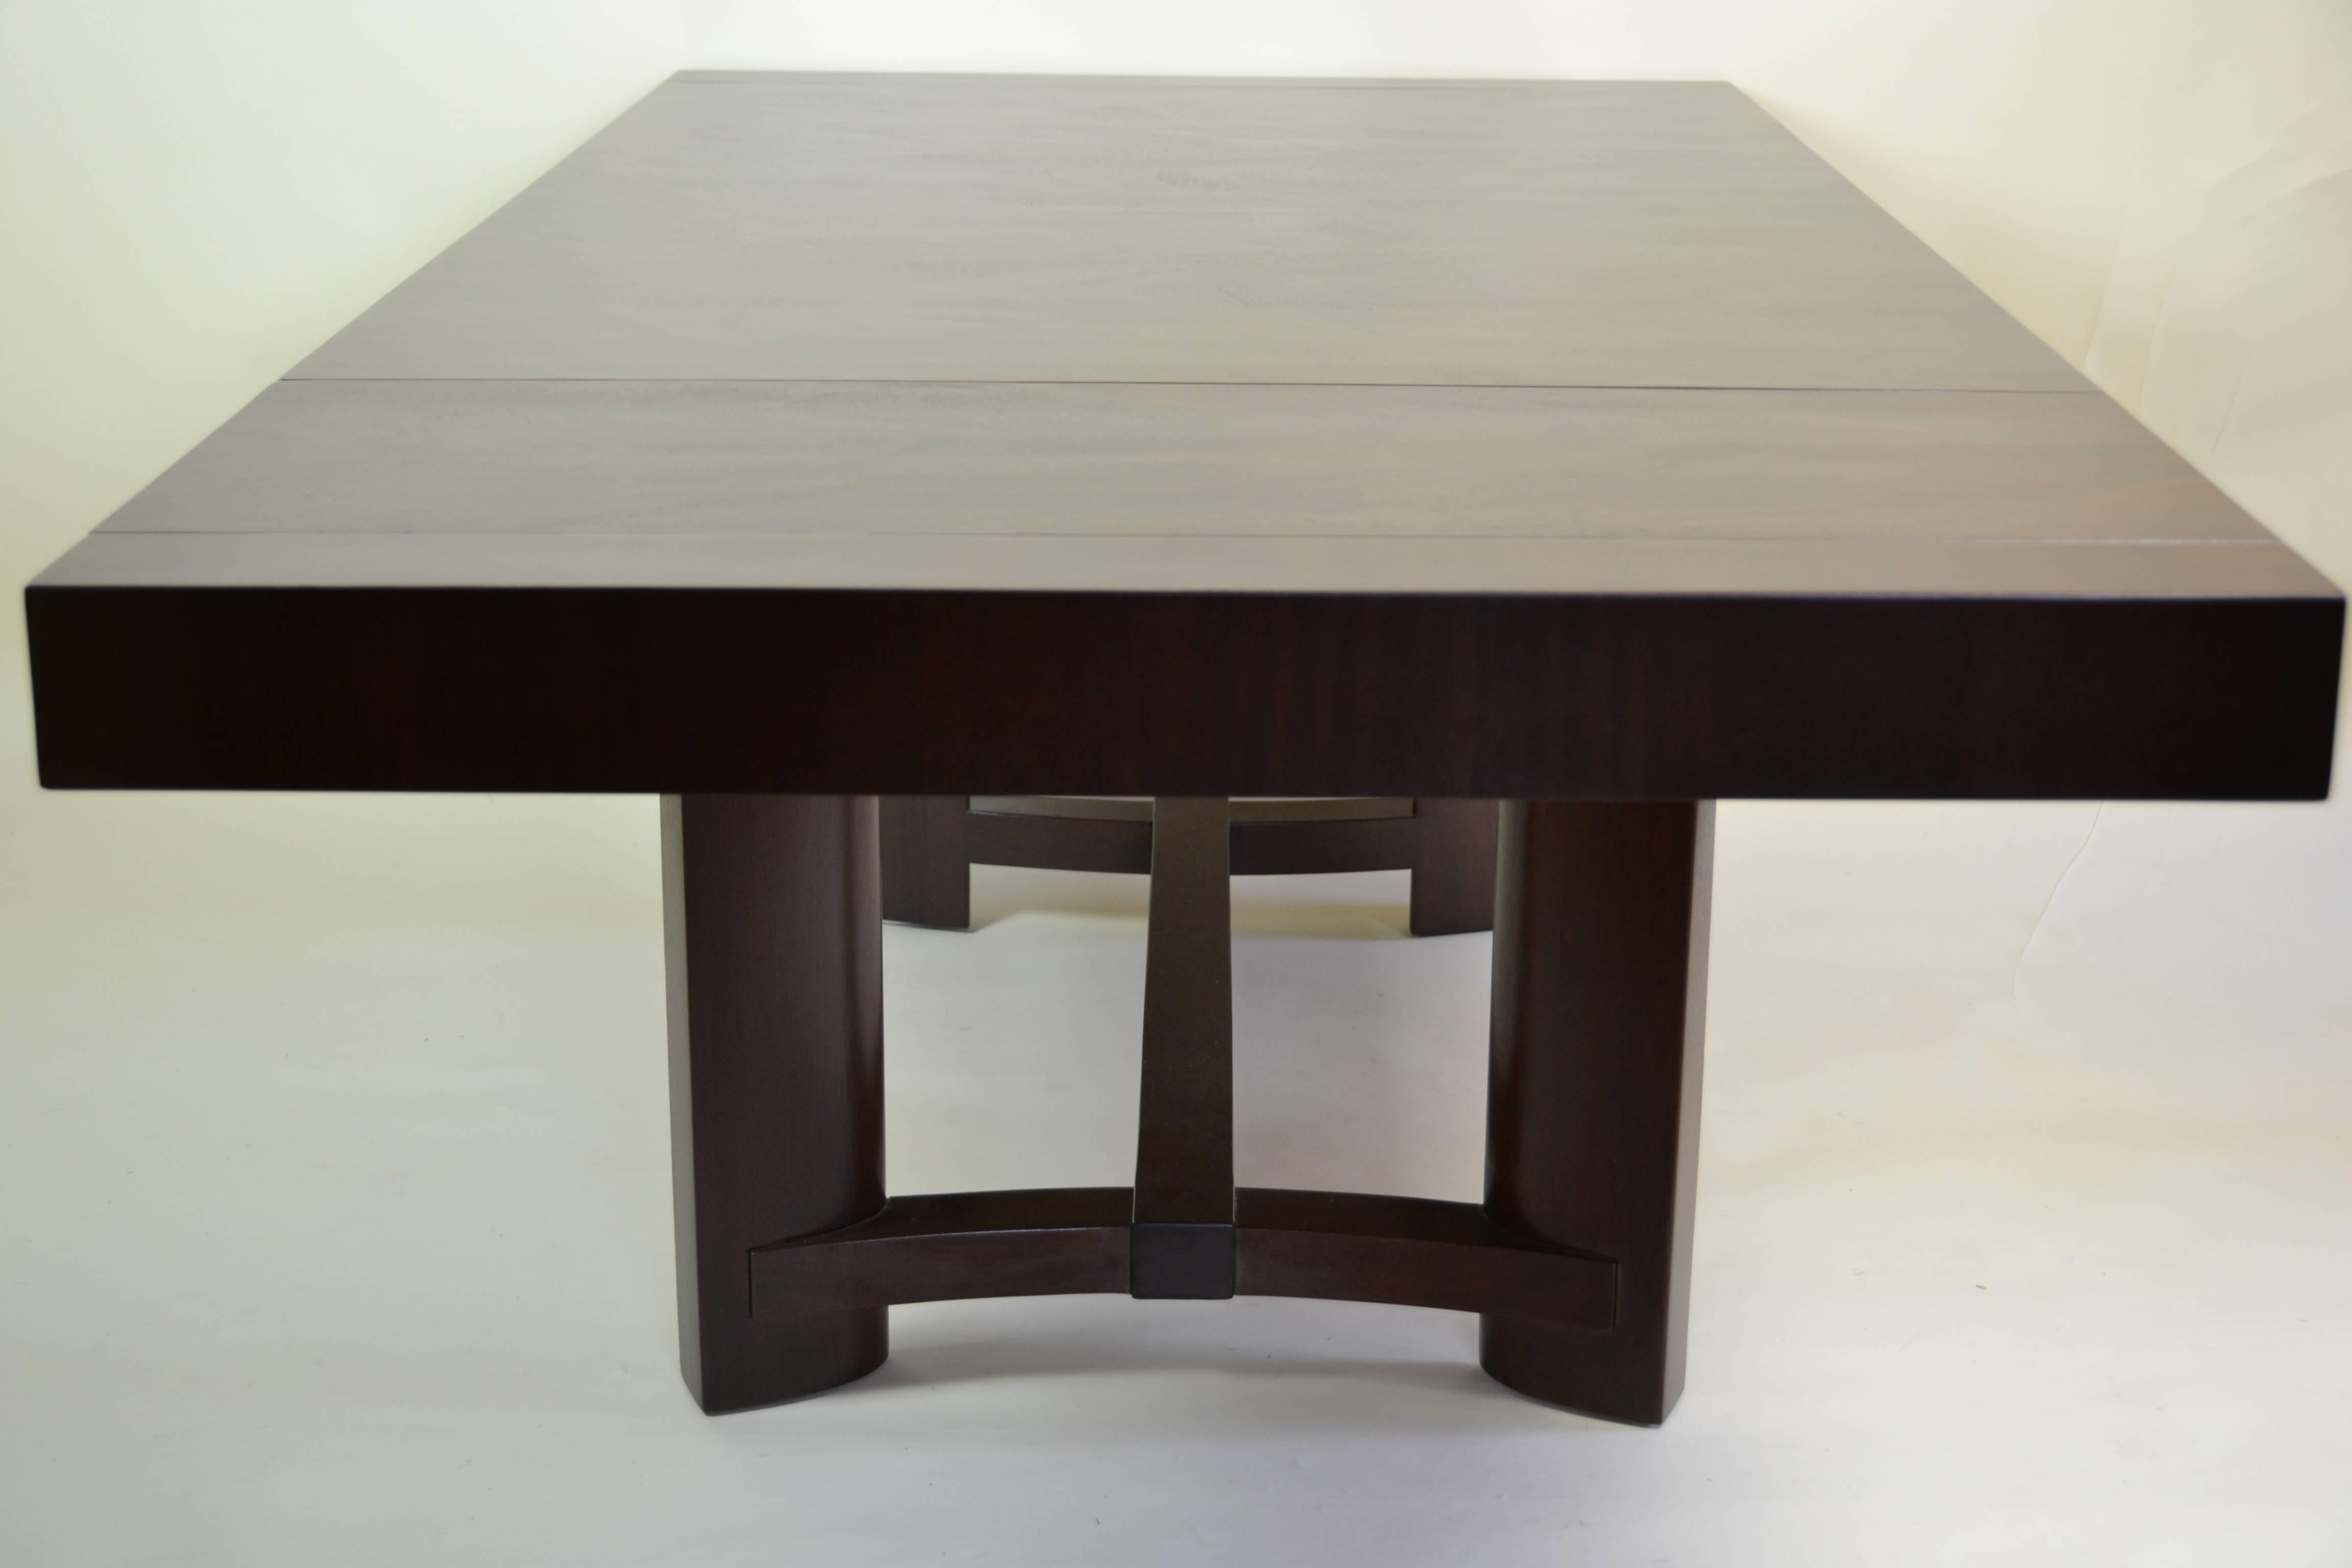 A Classic mahogany extension dining table designed by T.H. Robsjohn-Gibbings for the Widdicomb Furniture Co. in the late 1940s. Each end pulls out to add a 14 inch leaf. This extends the table from 66 inches to 94 inches.
The table is in excellent